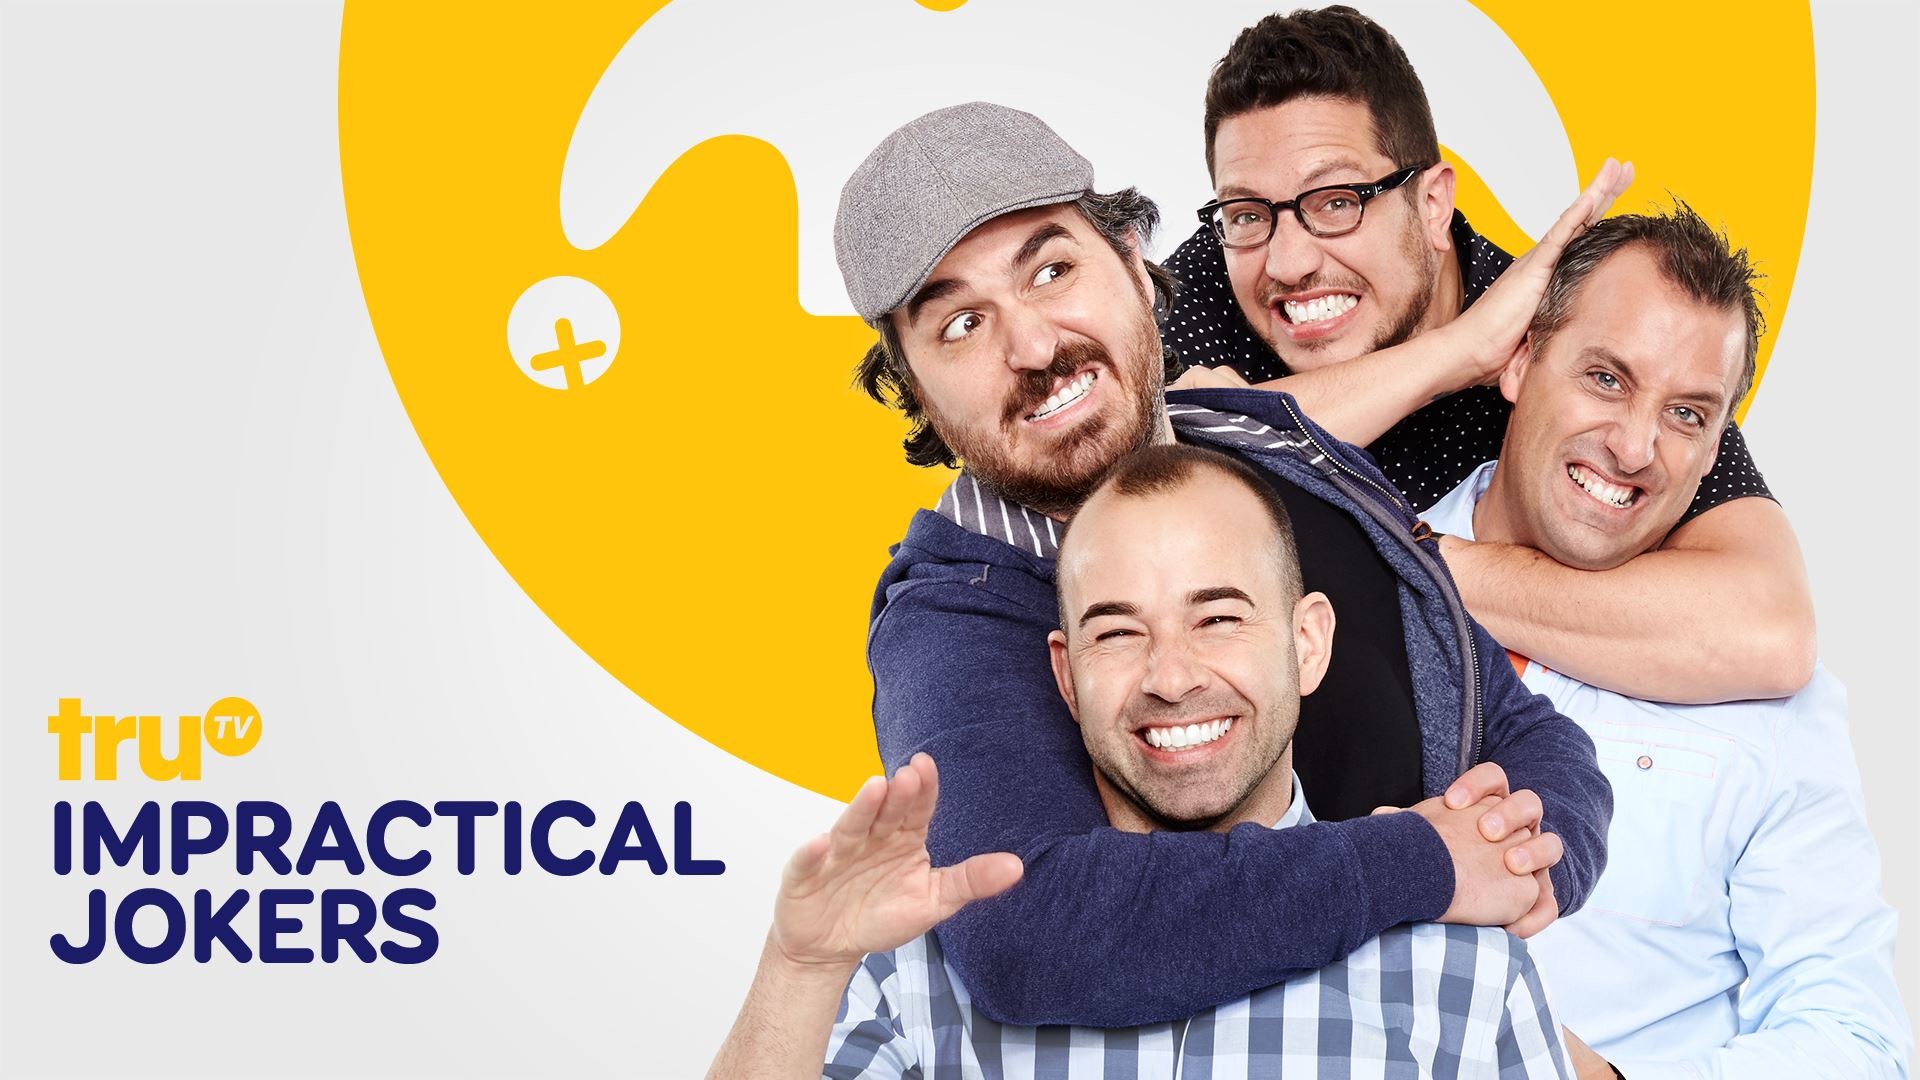 Are any of the impractical jokers gay